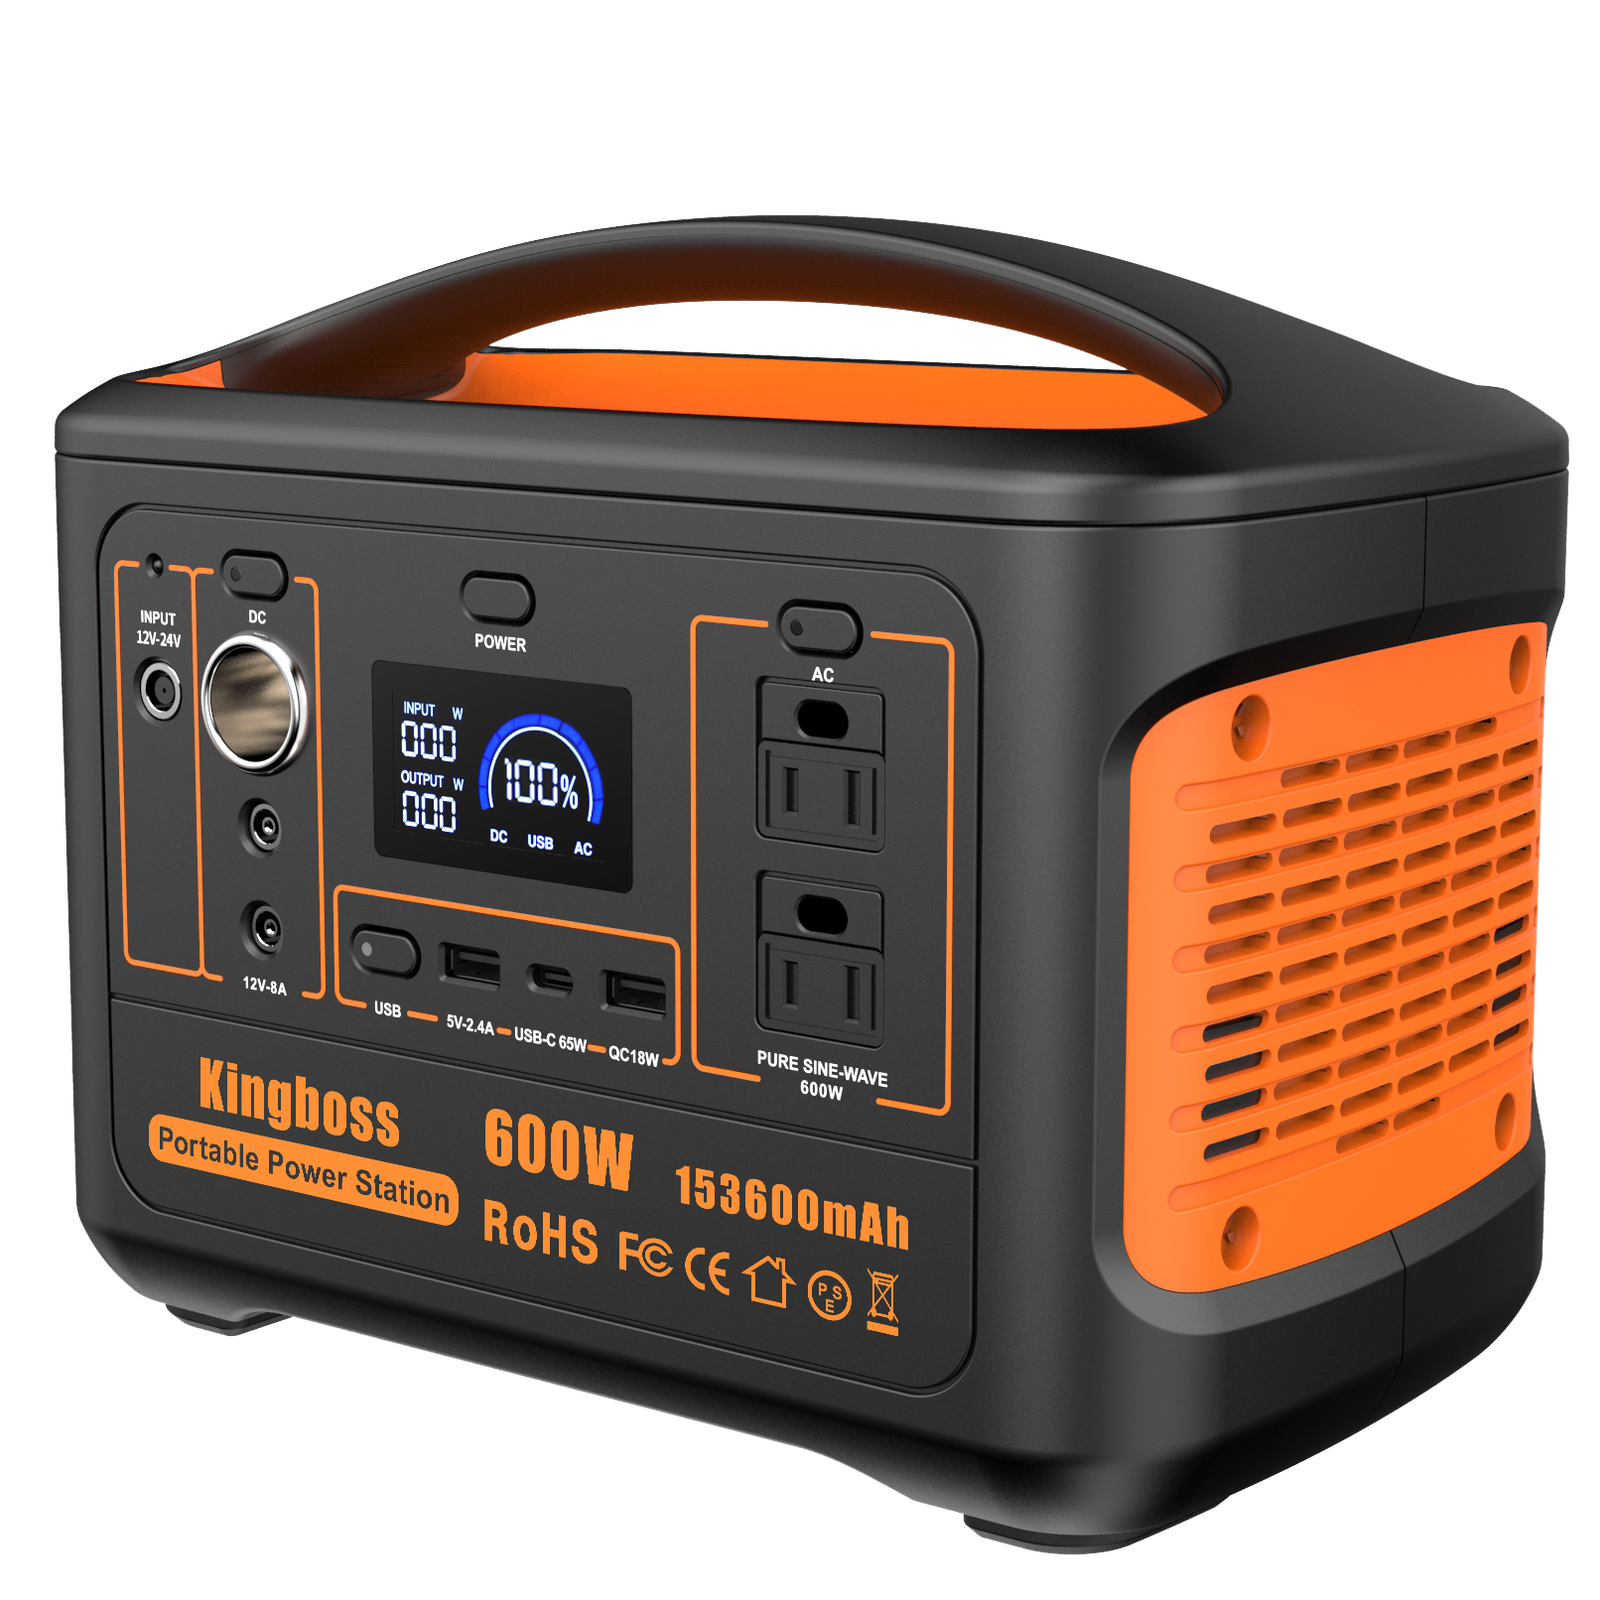 Kingboss 600W portable power station with multiple outlets